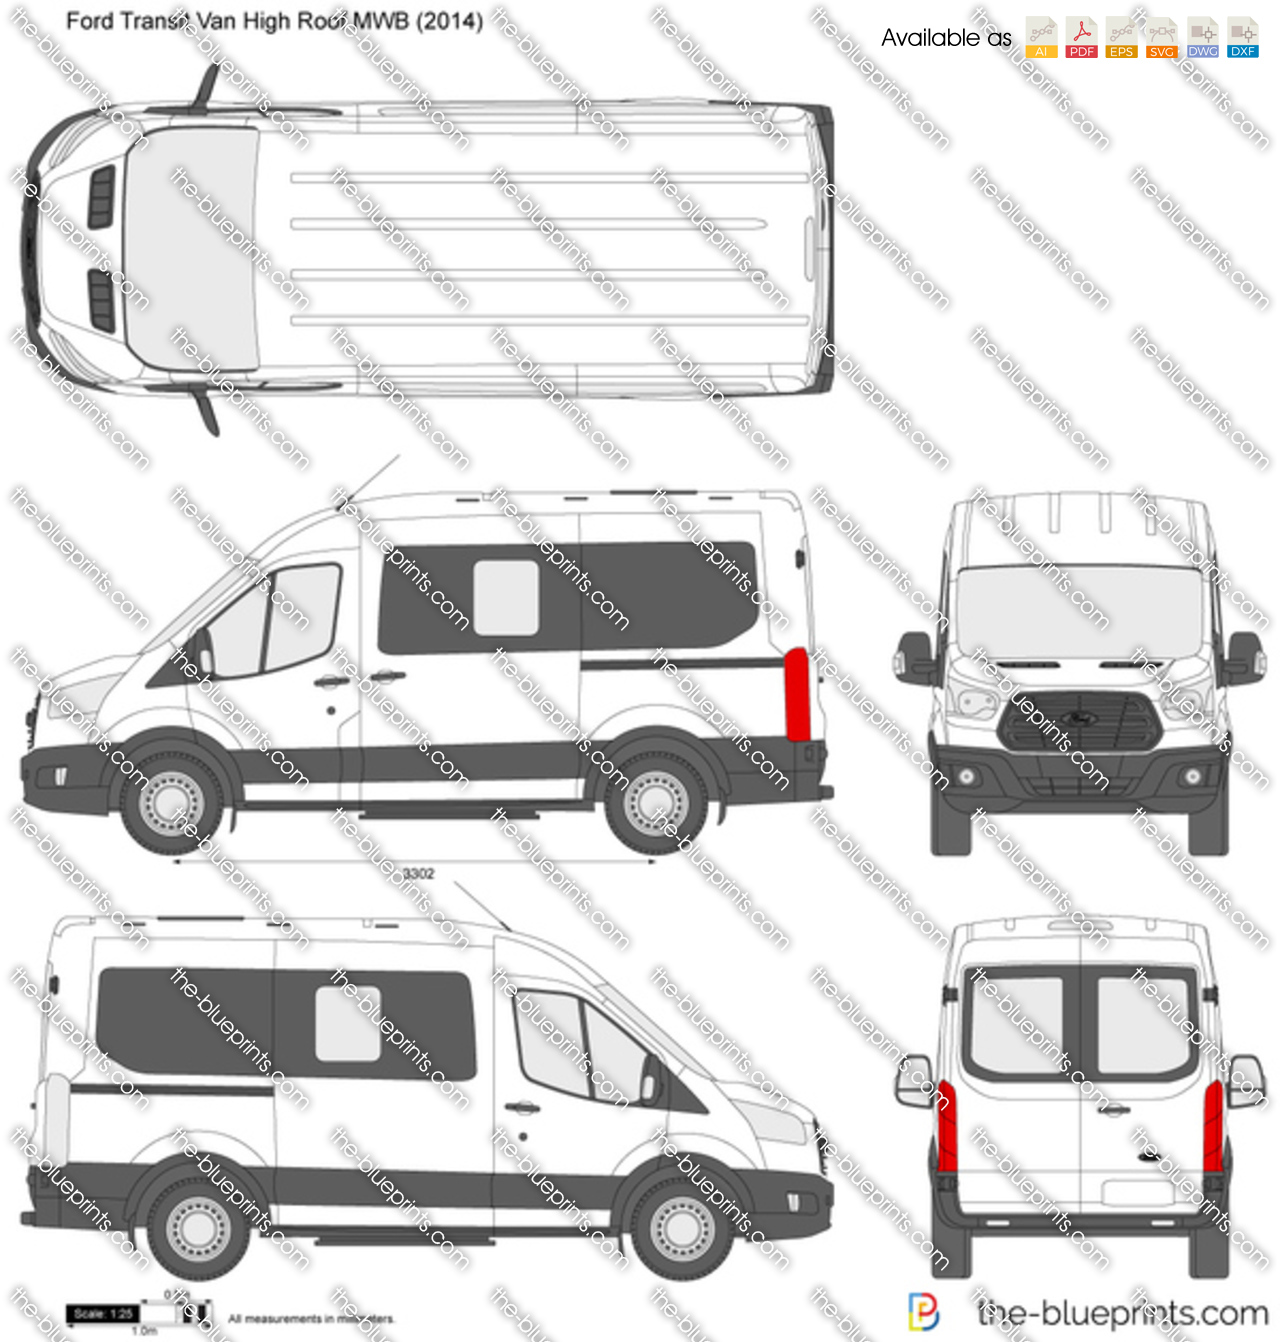 Possession bid lonely Ford Transit Van High Roof MWB vector drawing